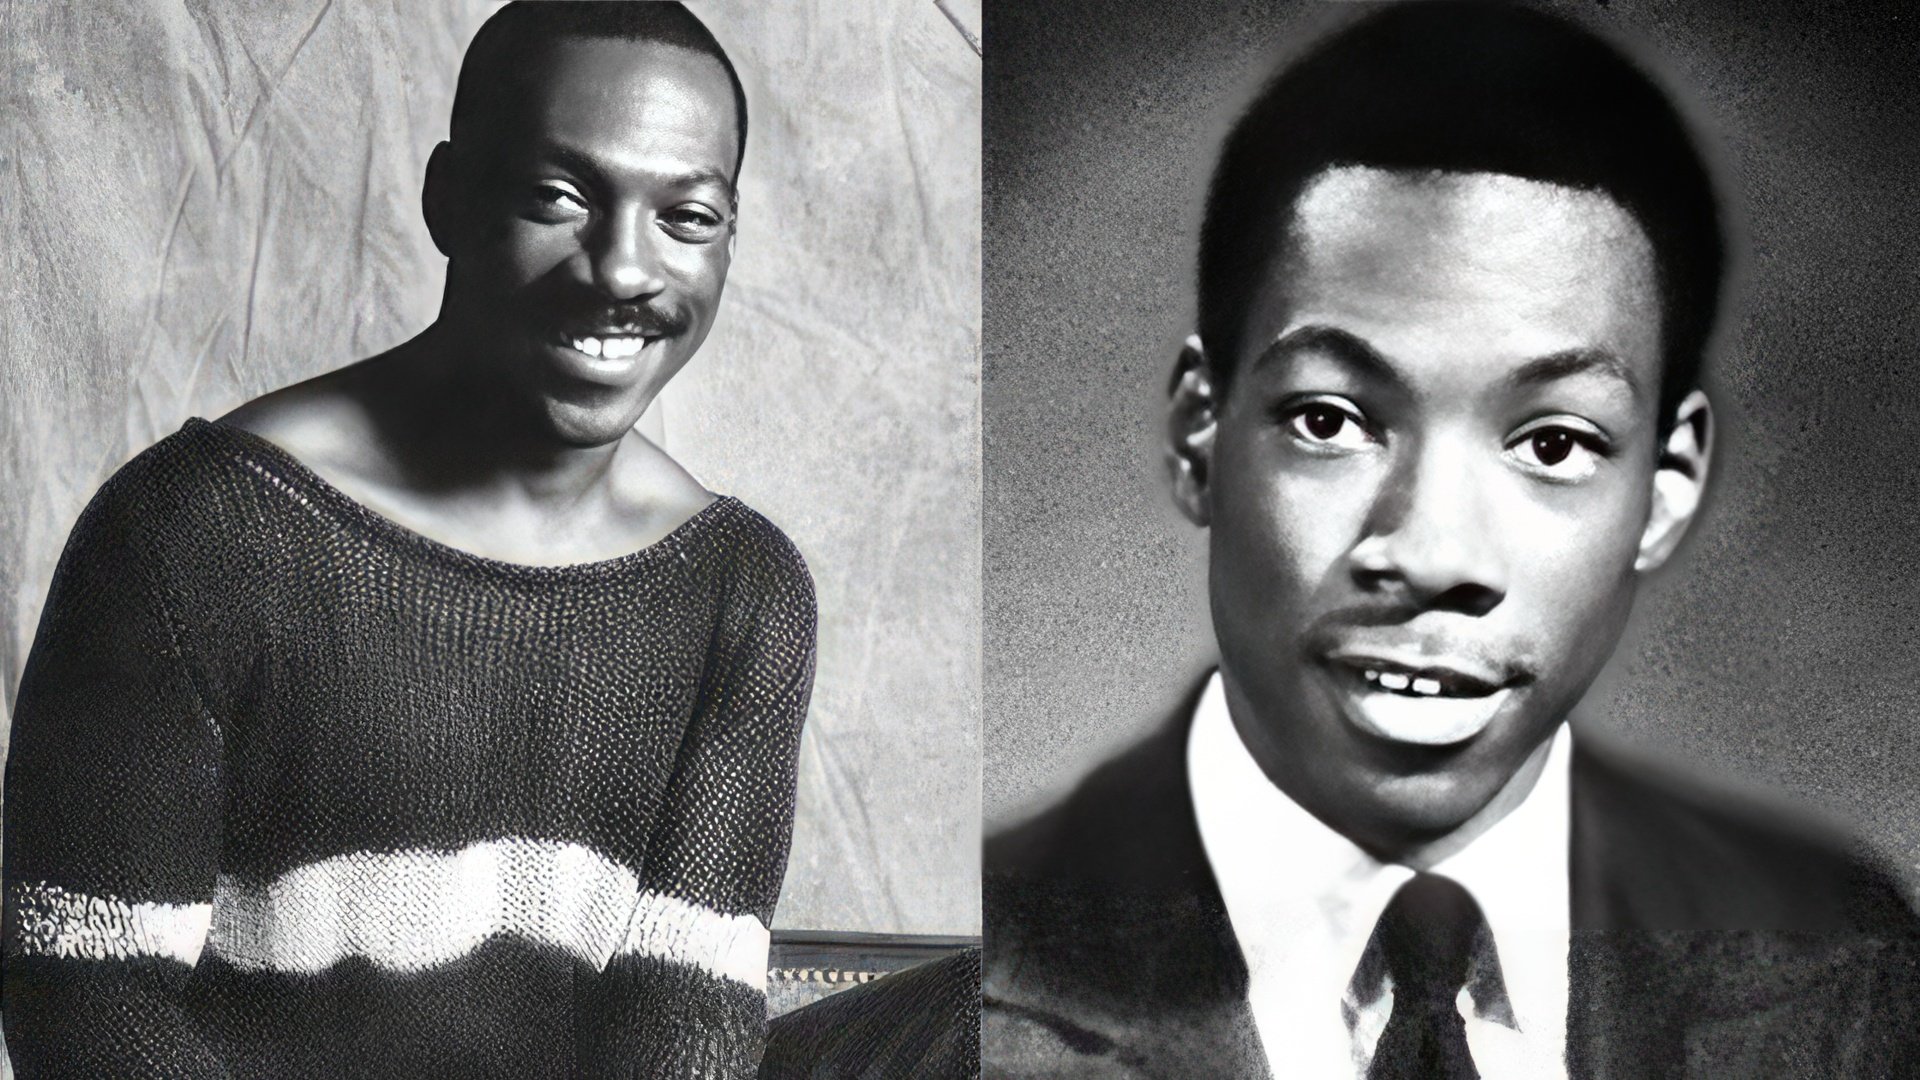 At the age of 15 Eddie Murphy already performed stand-up comedy in youth clubs and bars